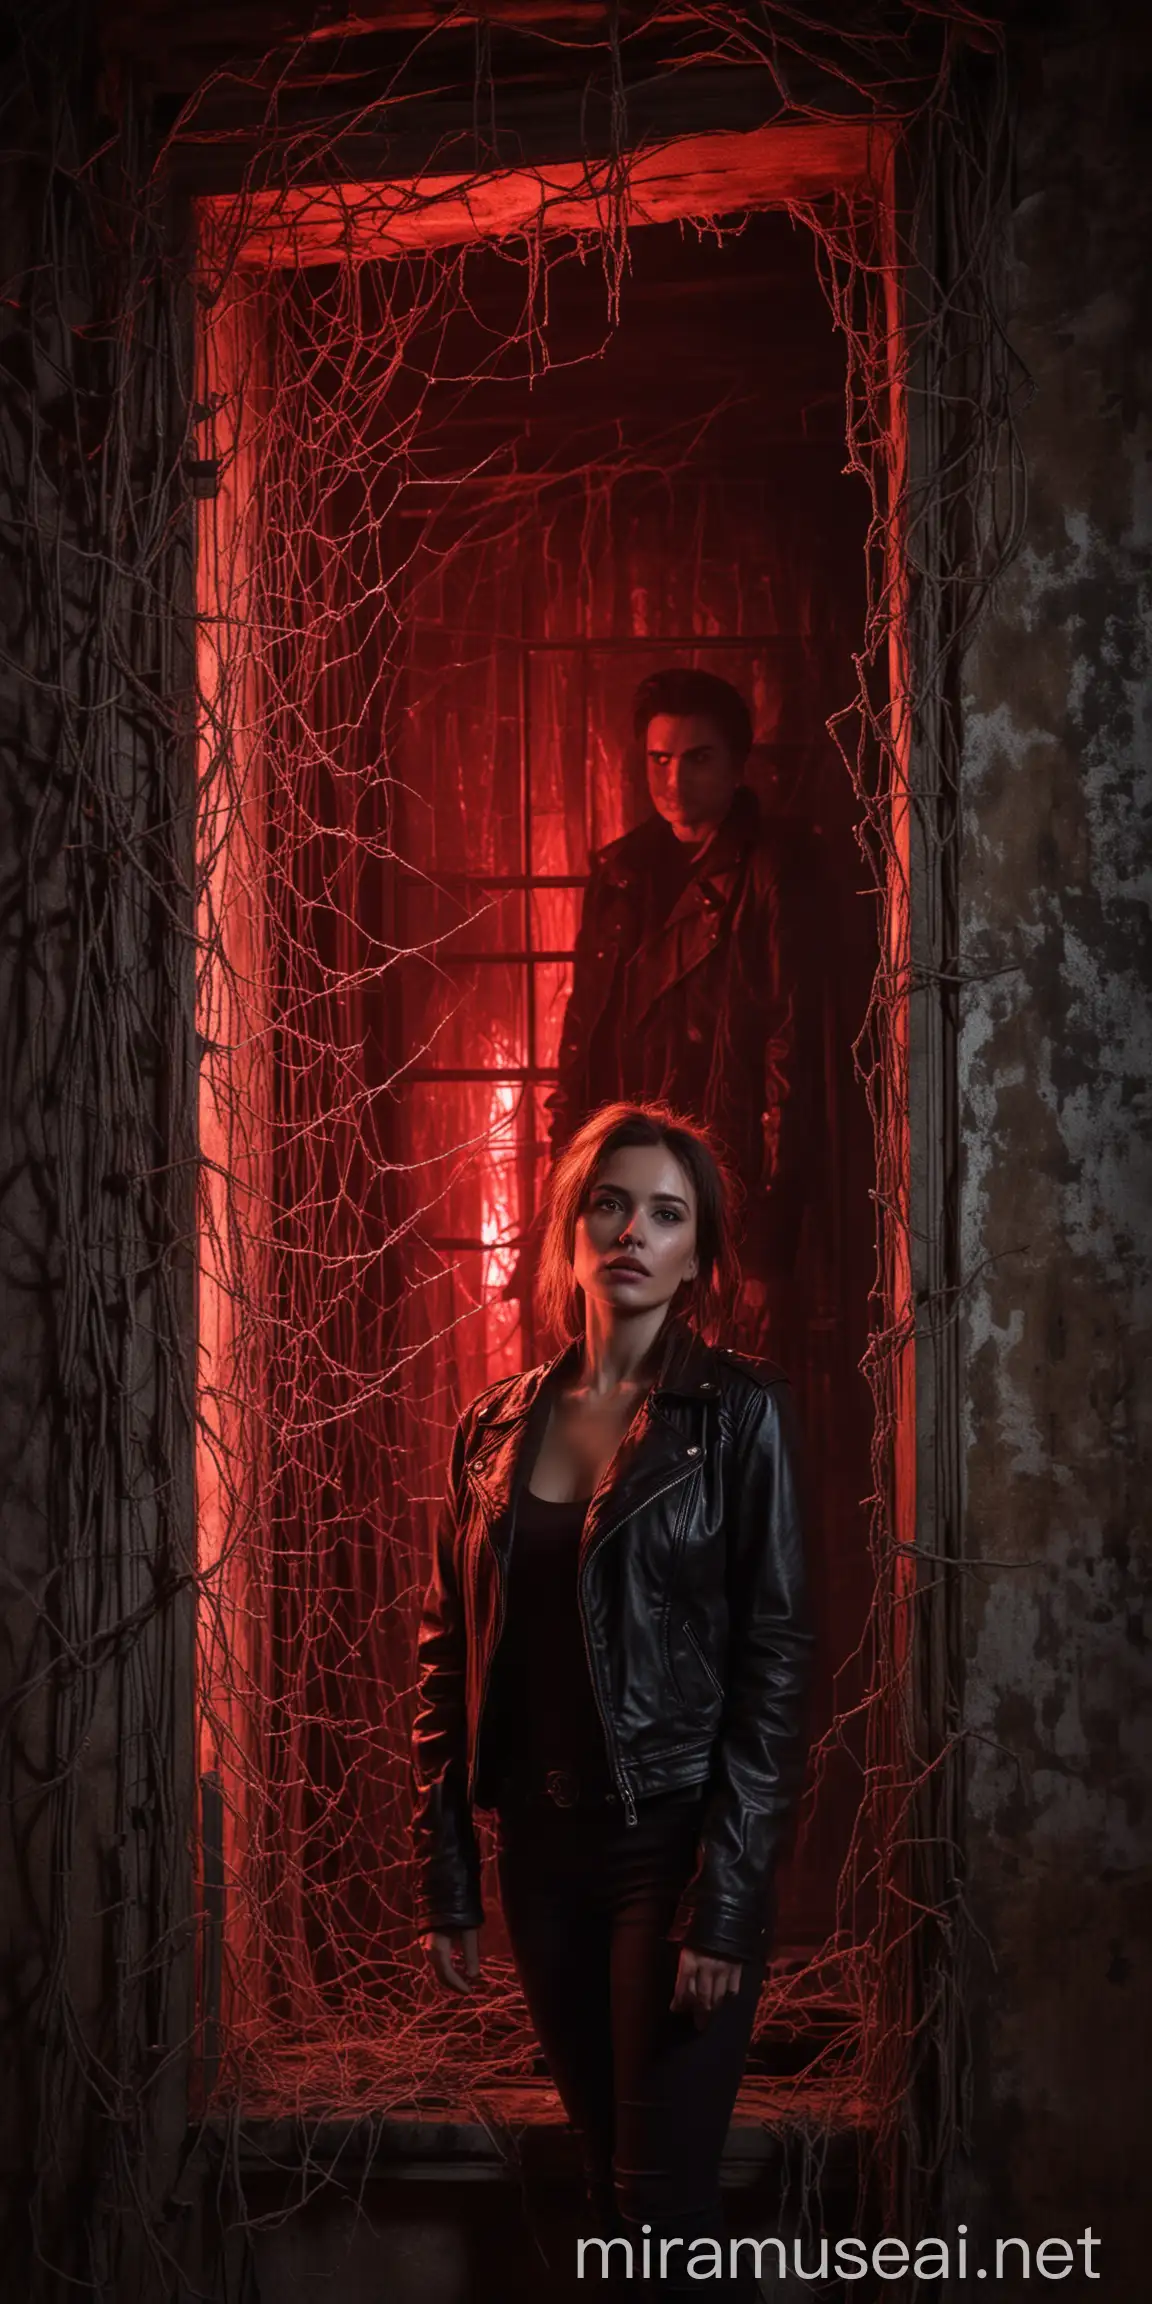 Mysterious Woman in Leather Jacket Gazes from Haunted House with Red Glow